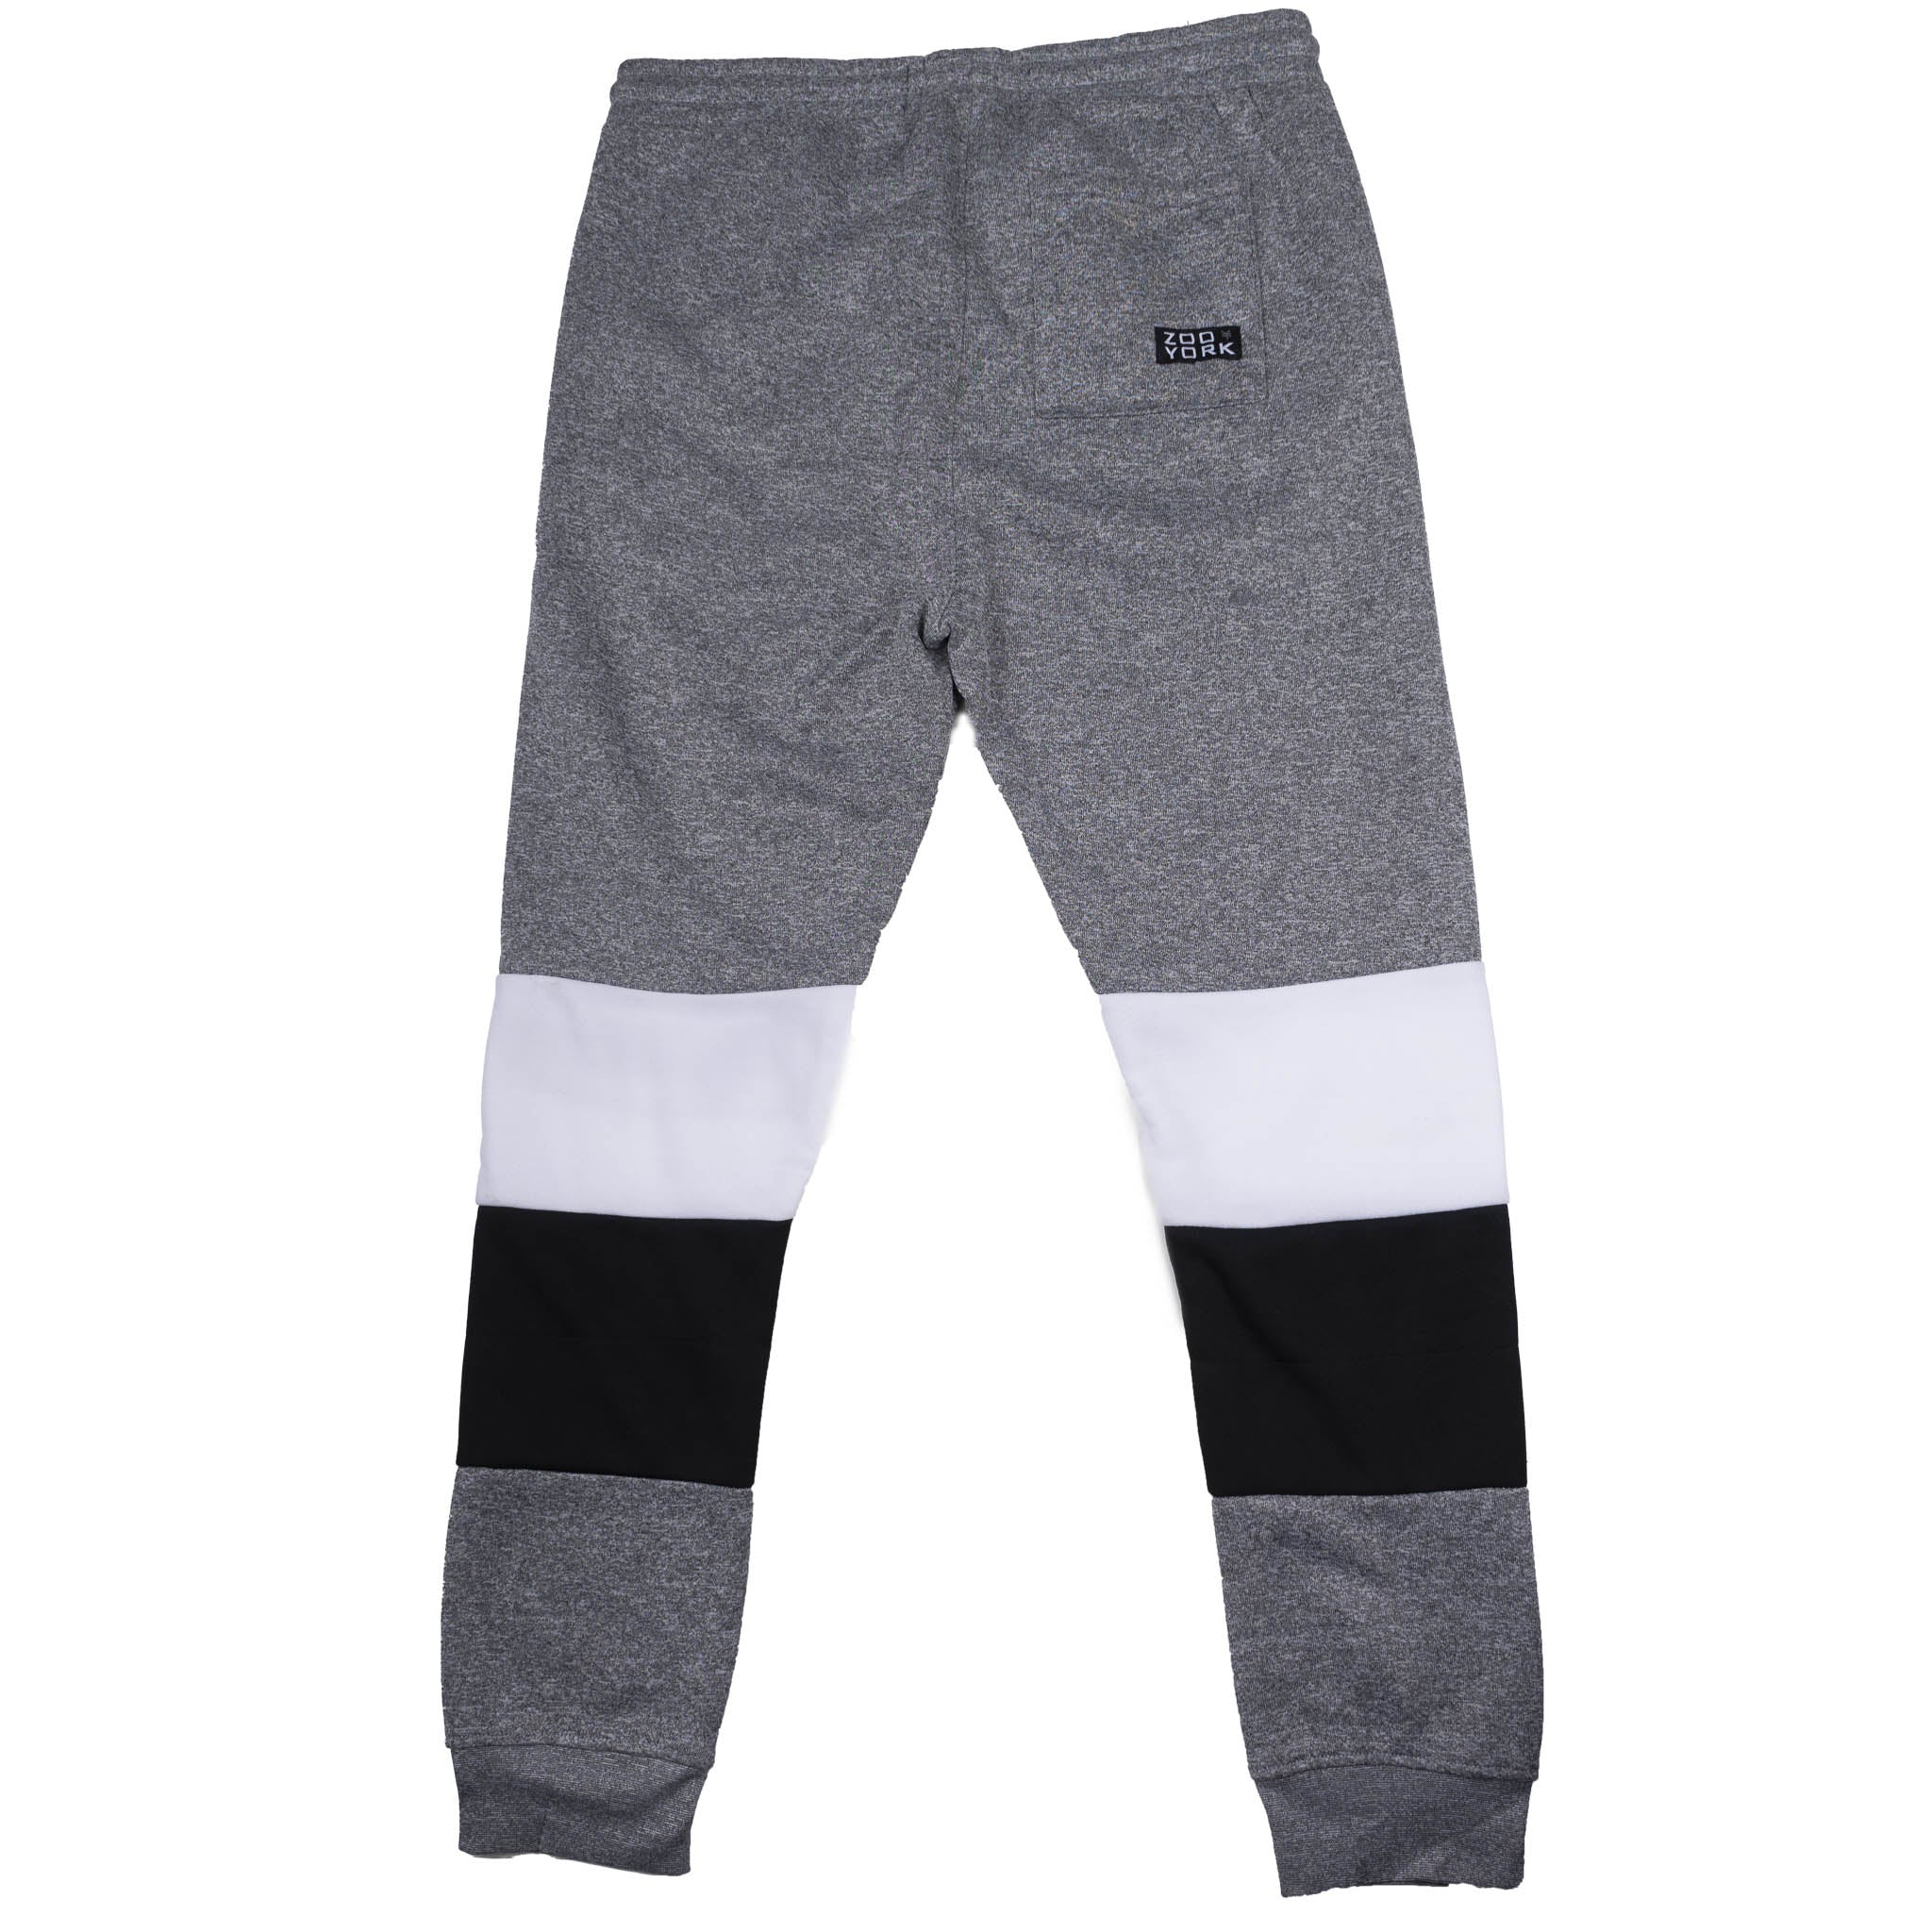 ZOO YORK JOGGER - ZYJGRA11724 [sold out]